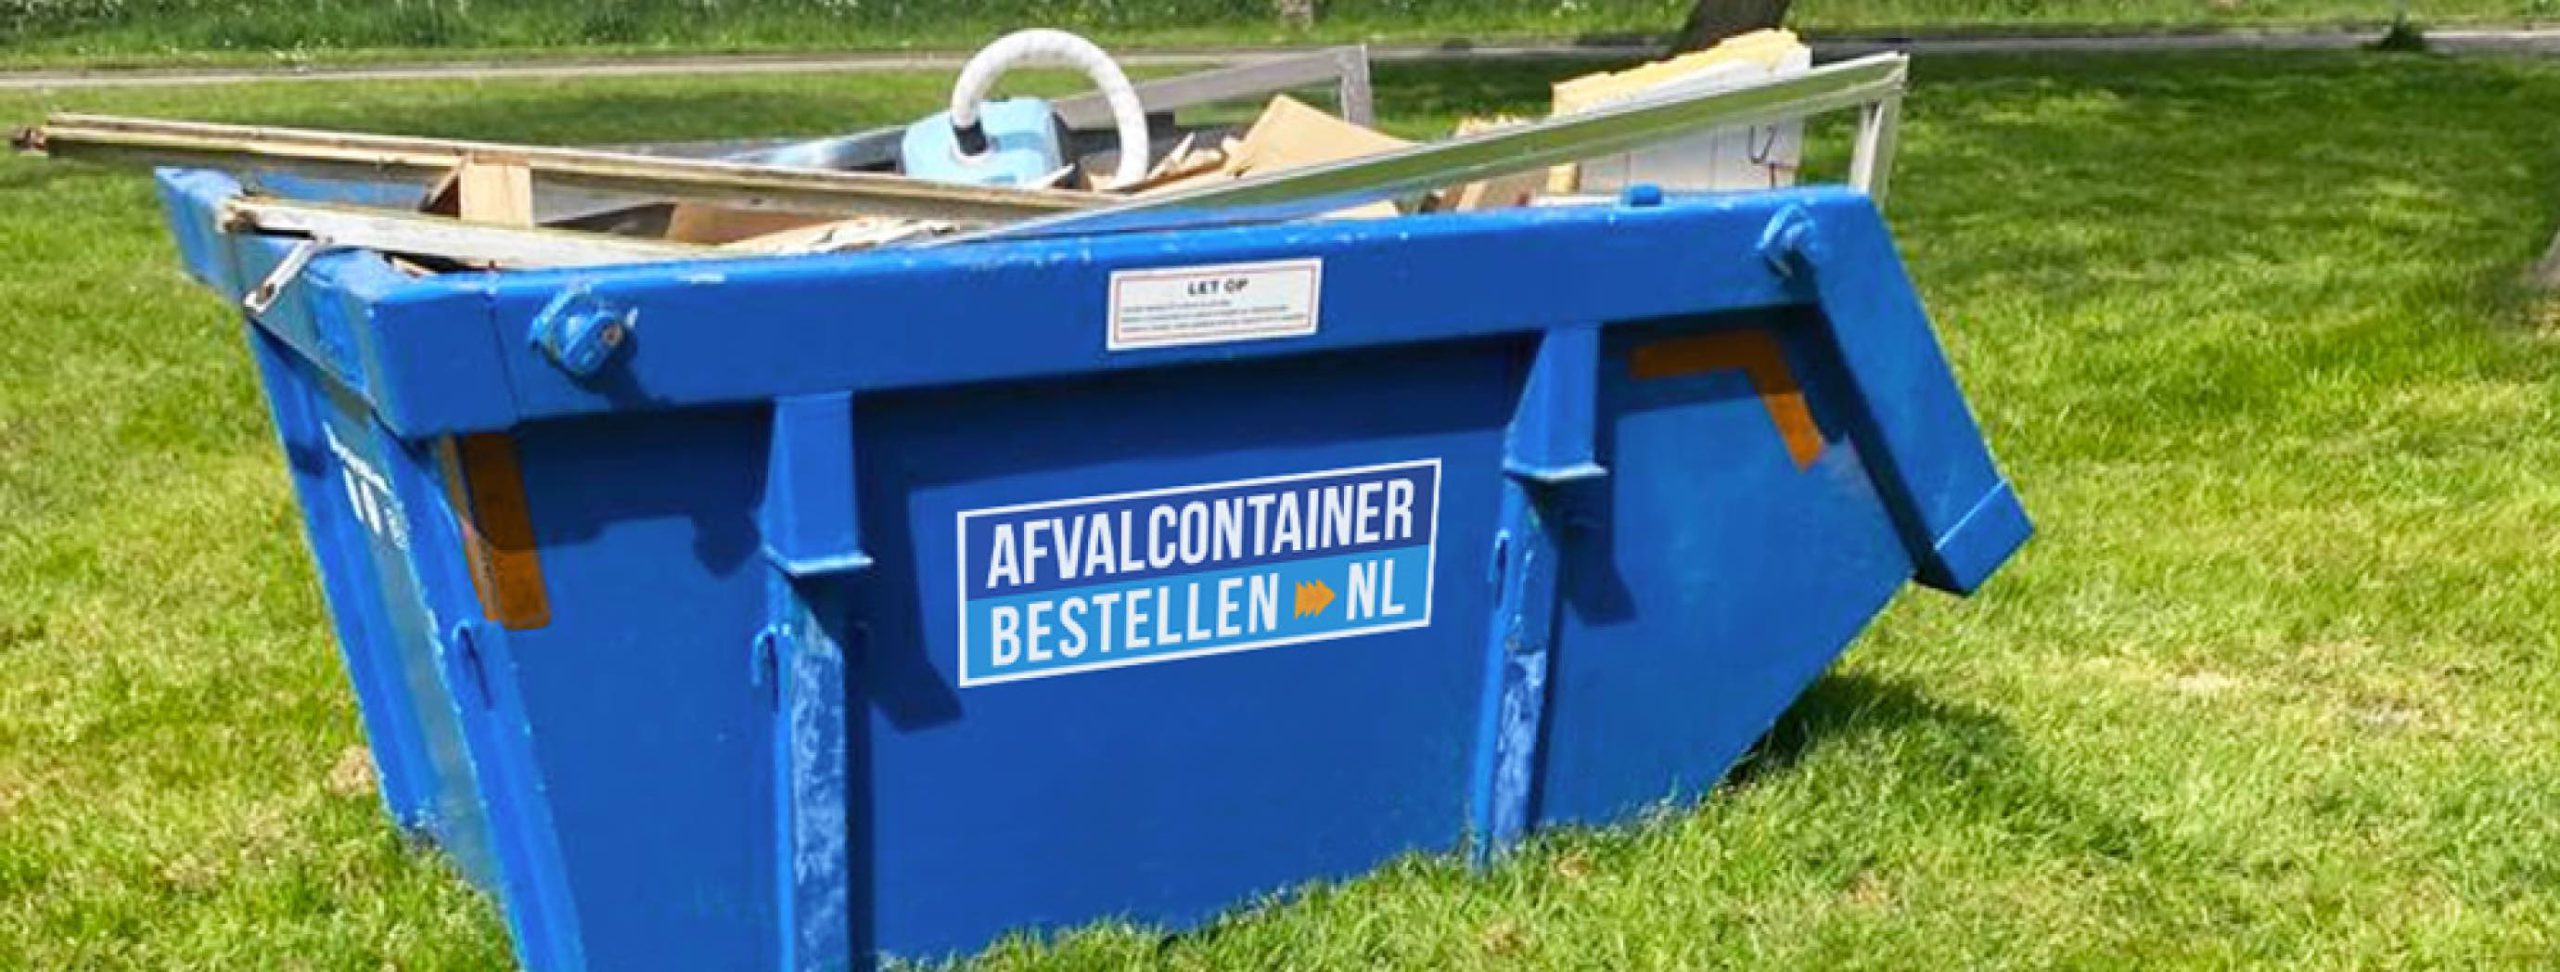 Grofvuil container | Afvalcontainer bestellen